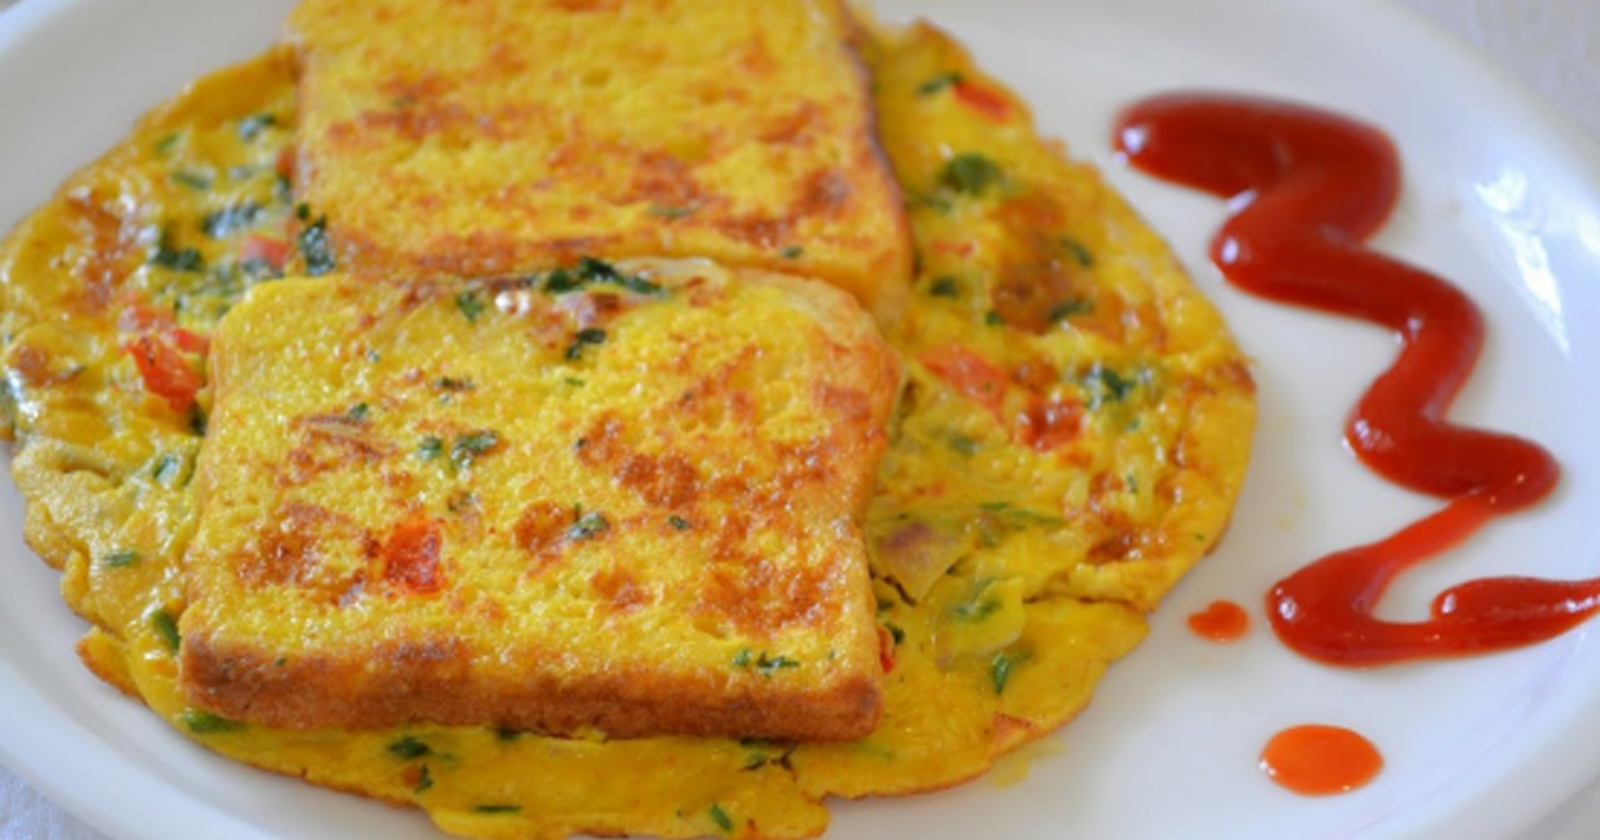 How to Make a Masala Omelette